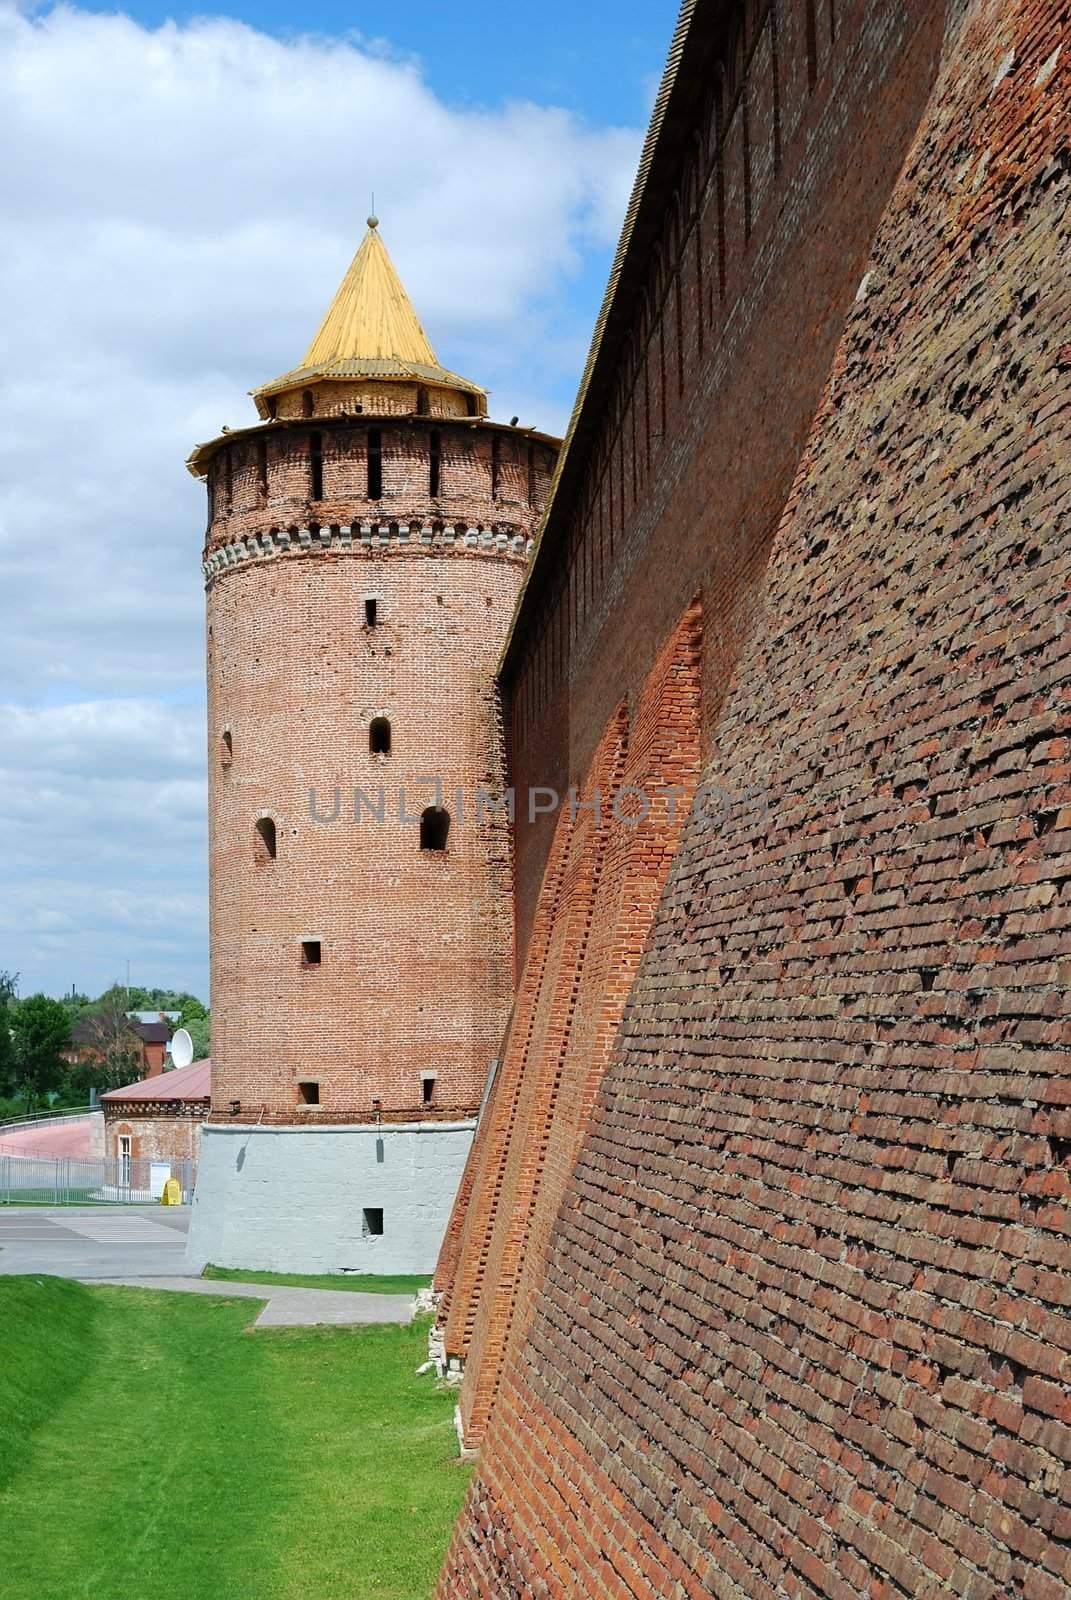 Partly reconstructed brick wall and tower of old fortress in Kolomna town near Moscow, Russia (vertical version)